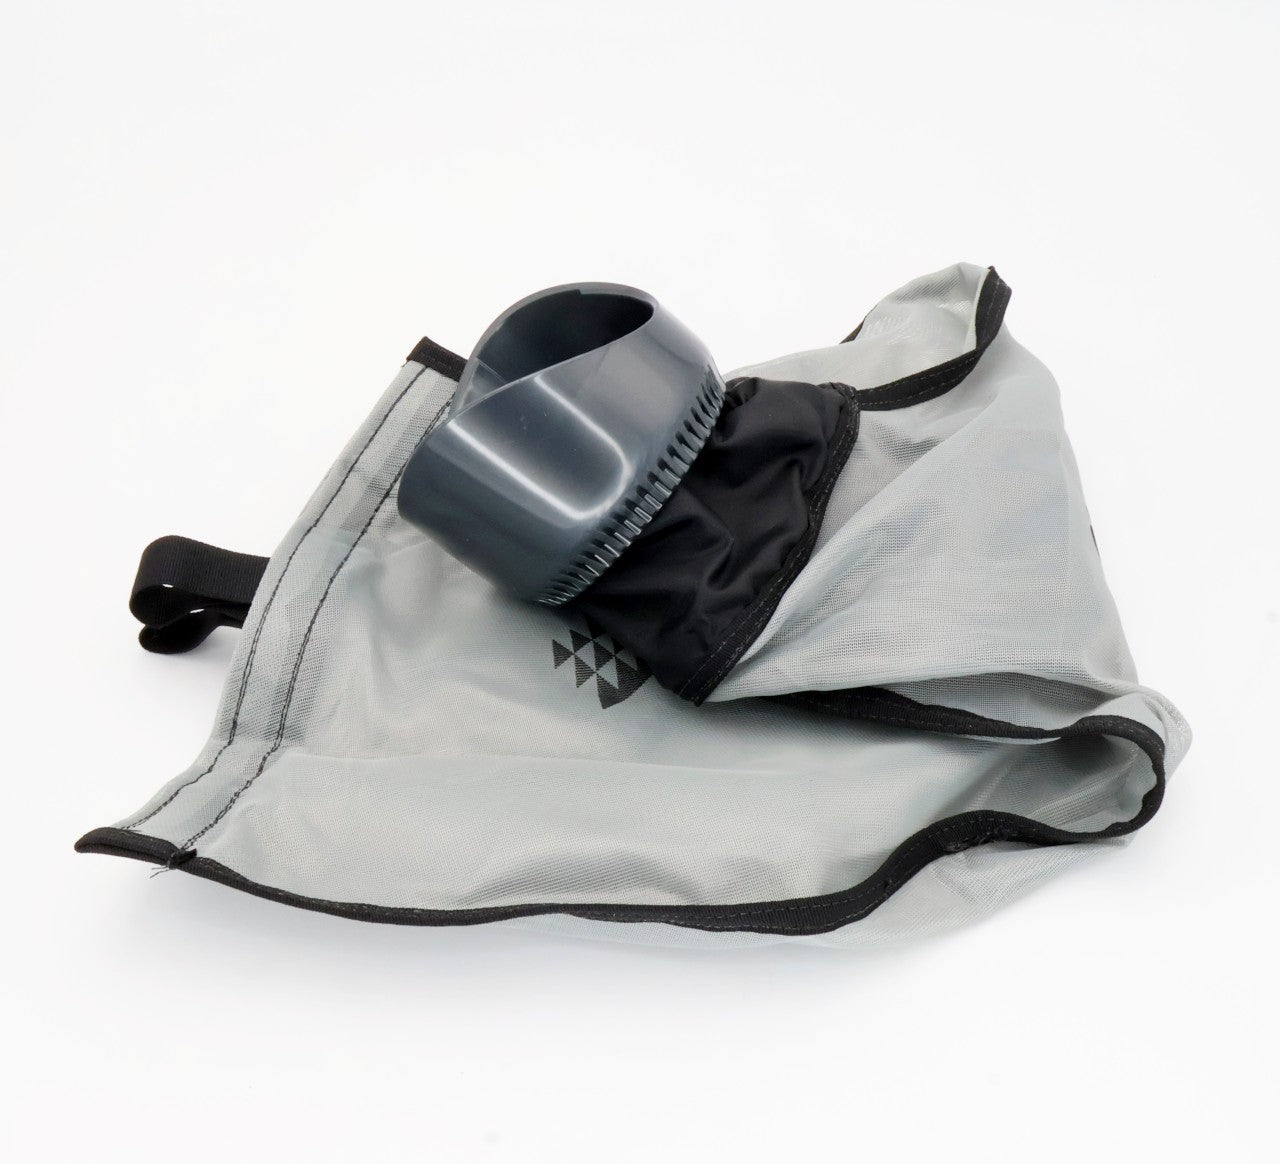 Pentair Debris Bag w Collar for Racer Pressure Side Cleaners 360319 - Cleaner Parts - img-2